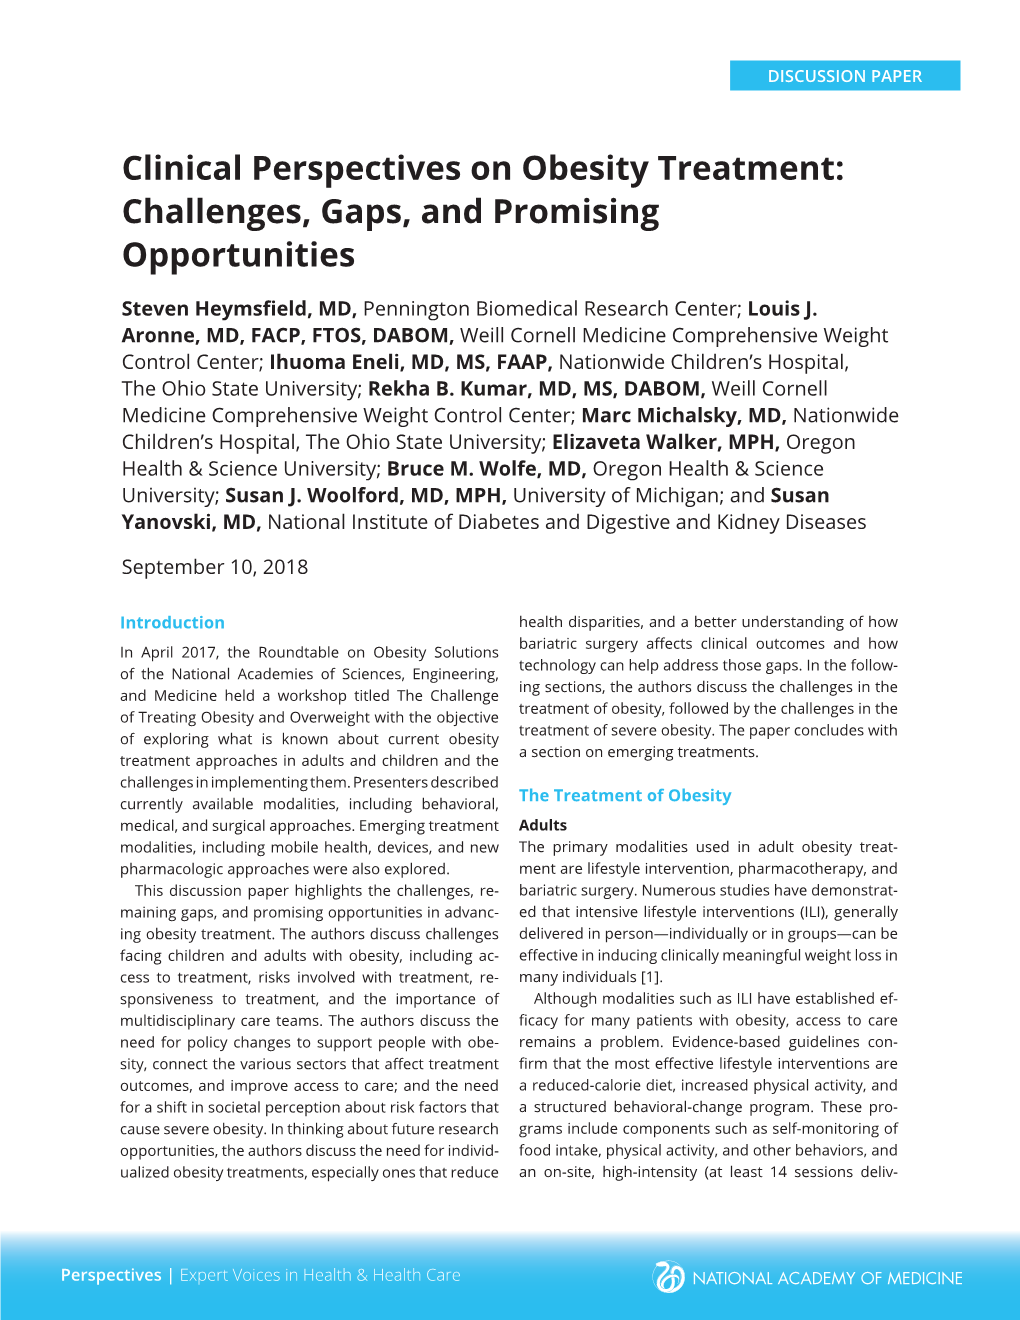 Clinical Perspectives on Obesity Treatment: Challenges, Gaps, and Promising Opportunities